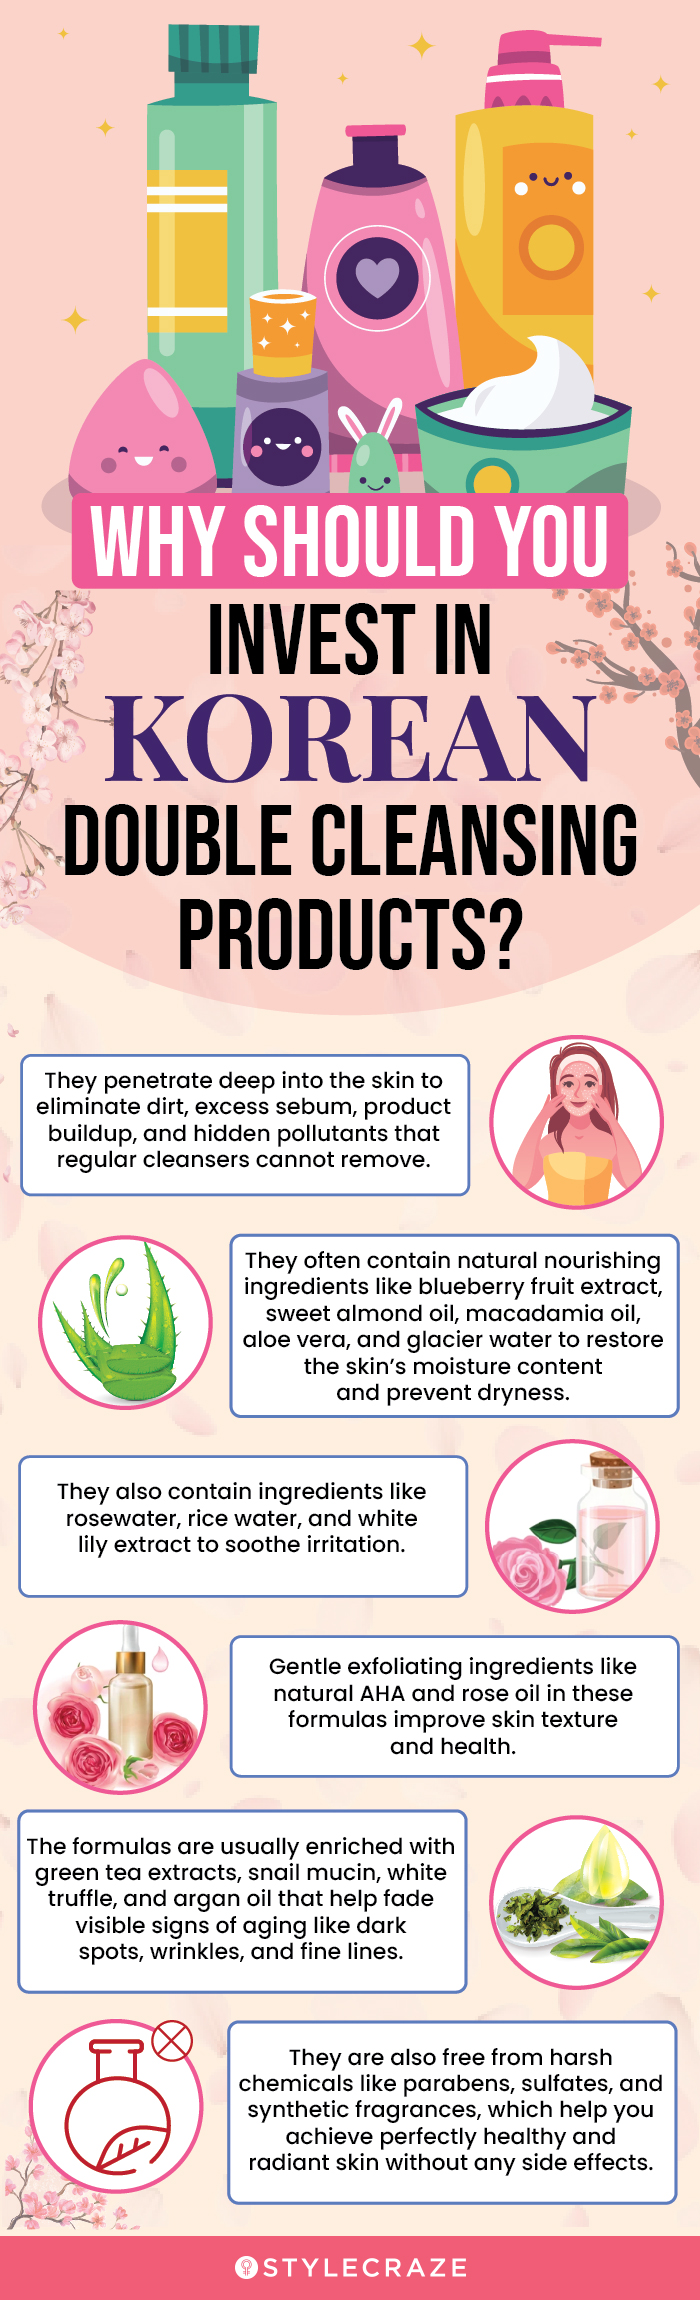 Why Should You Invest In Korean Double Cleansing Products(infographic)